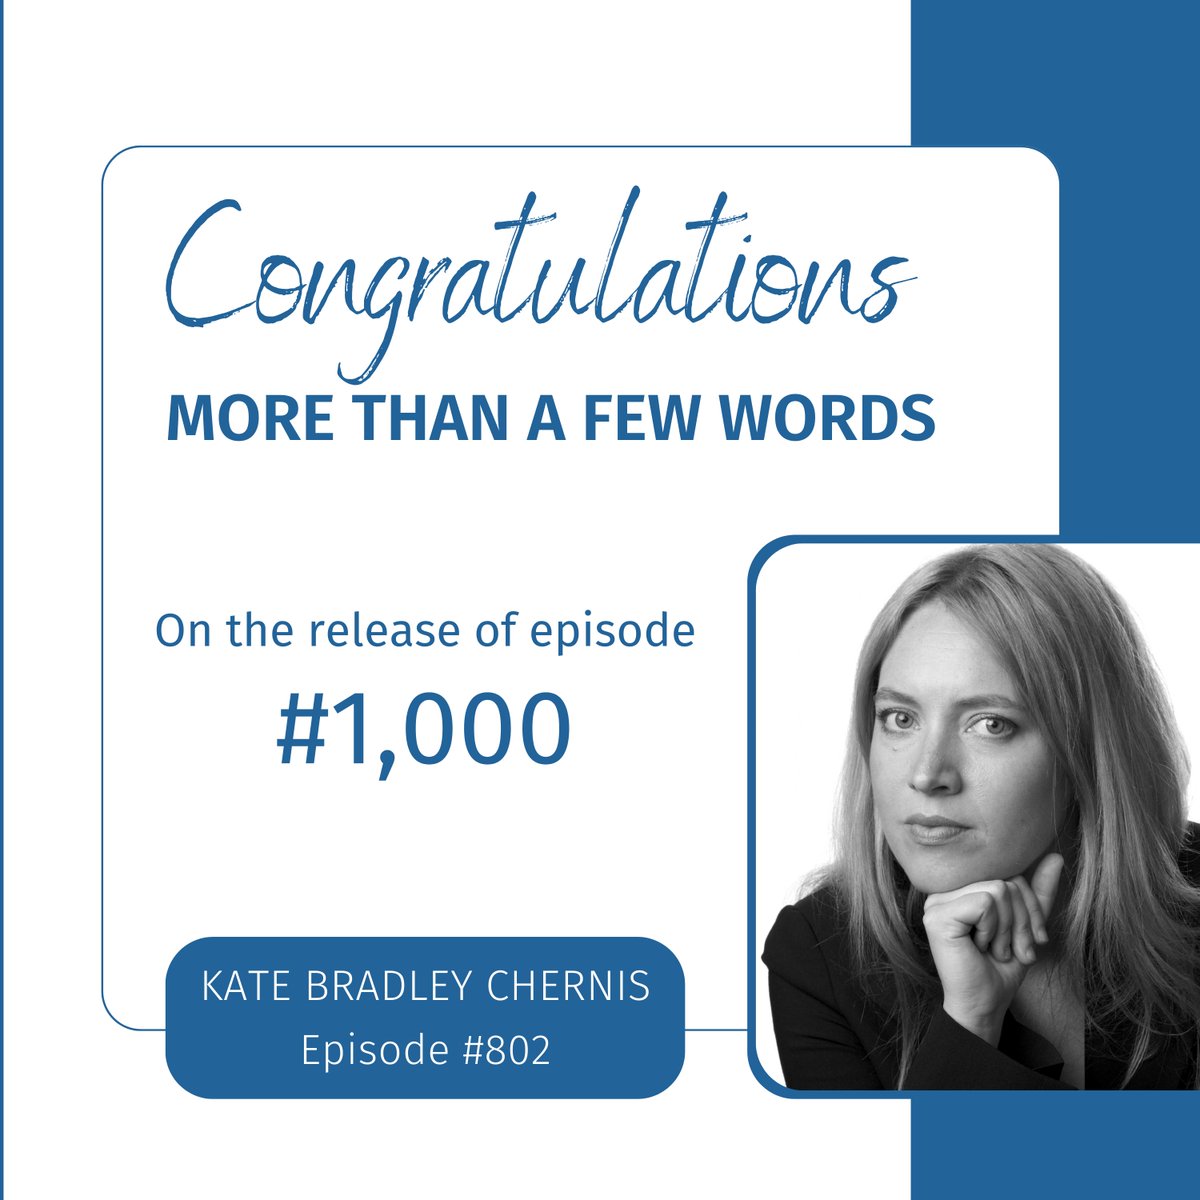 1,000 episodes... now THAT is impressive. Shoutout to @MTFWpodcast for hitting this amazing milestone - and for letting us be part of the incredible journey (psst: we were on ep 802 - give it a listen: bit.ly/4a4DiOa) @lorraineball #thisistheway